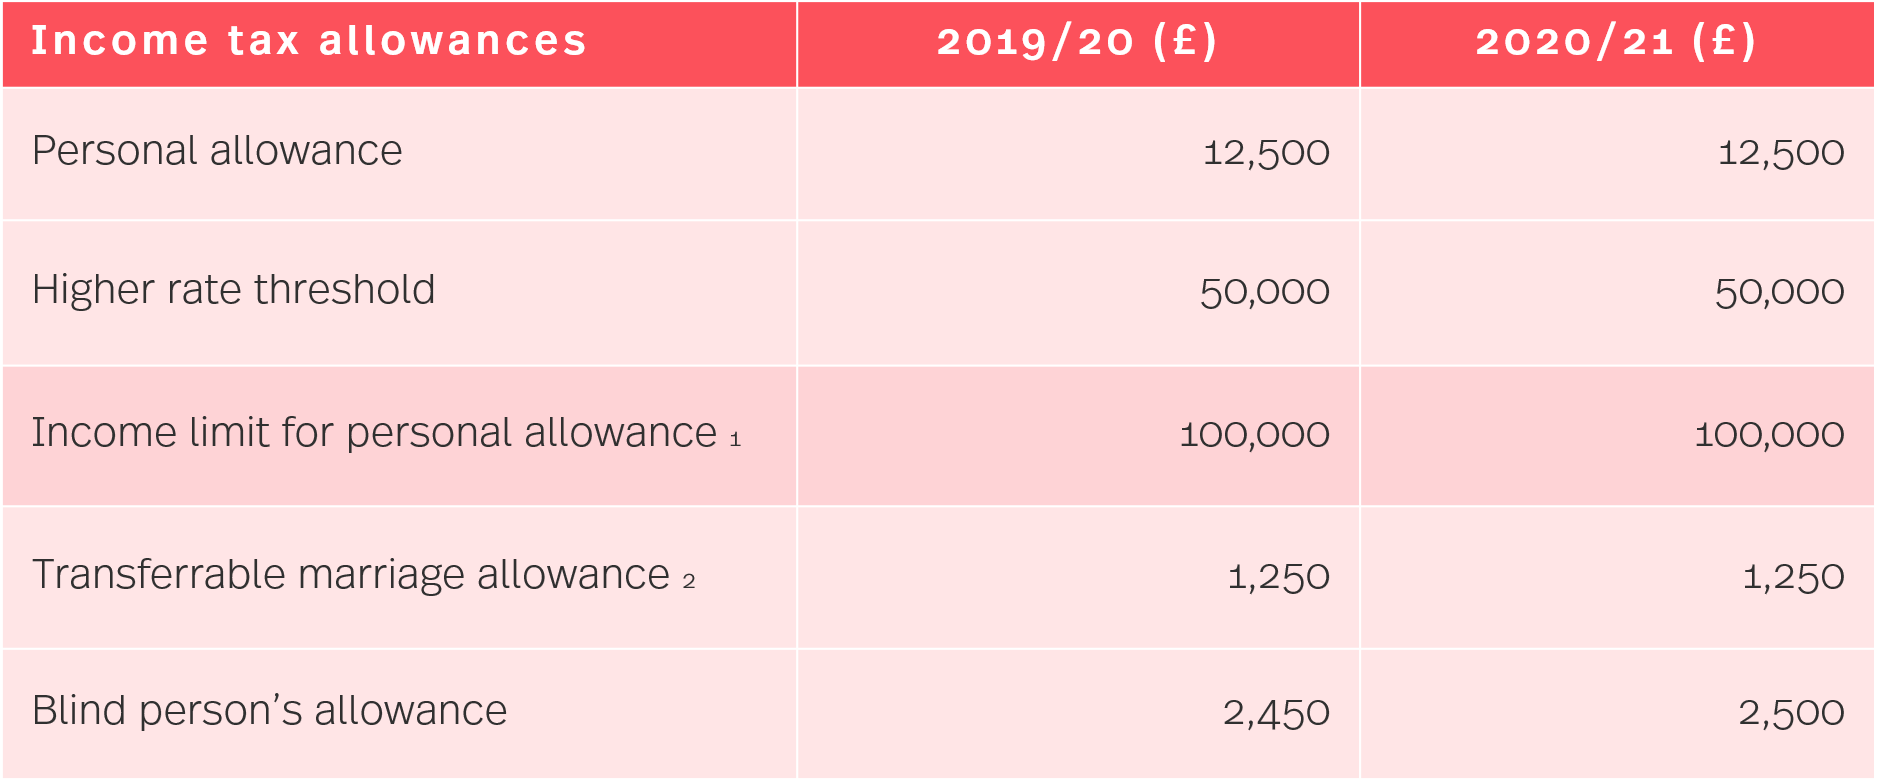 HMRC Tax Rates And Allowances For 2020 21 Simmons Simmons